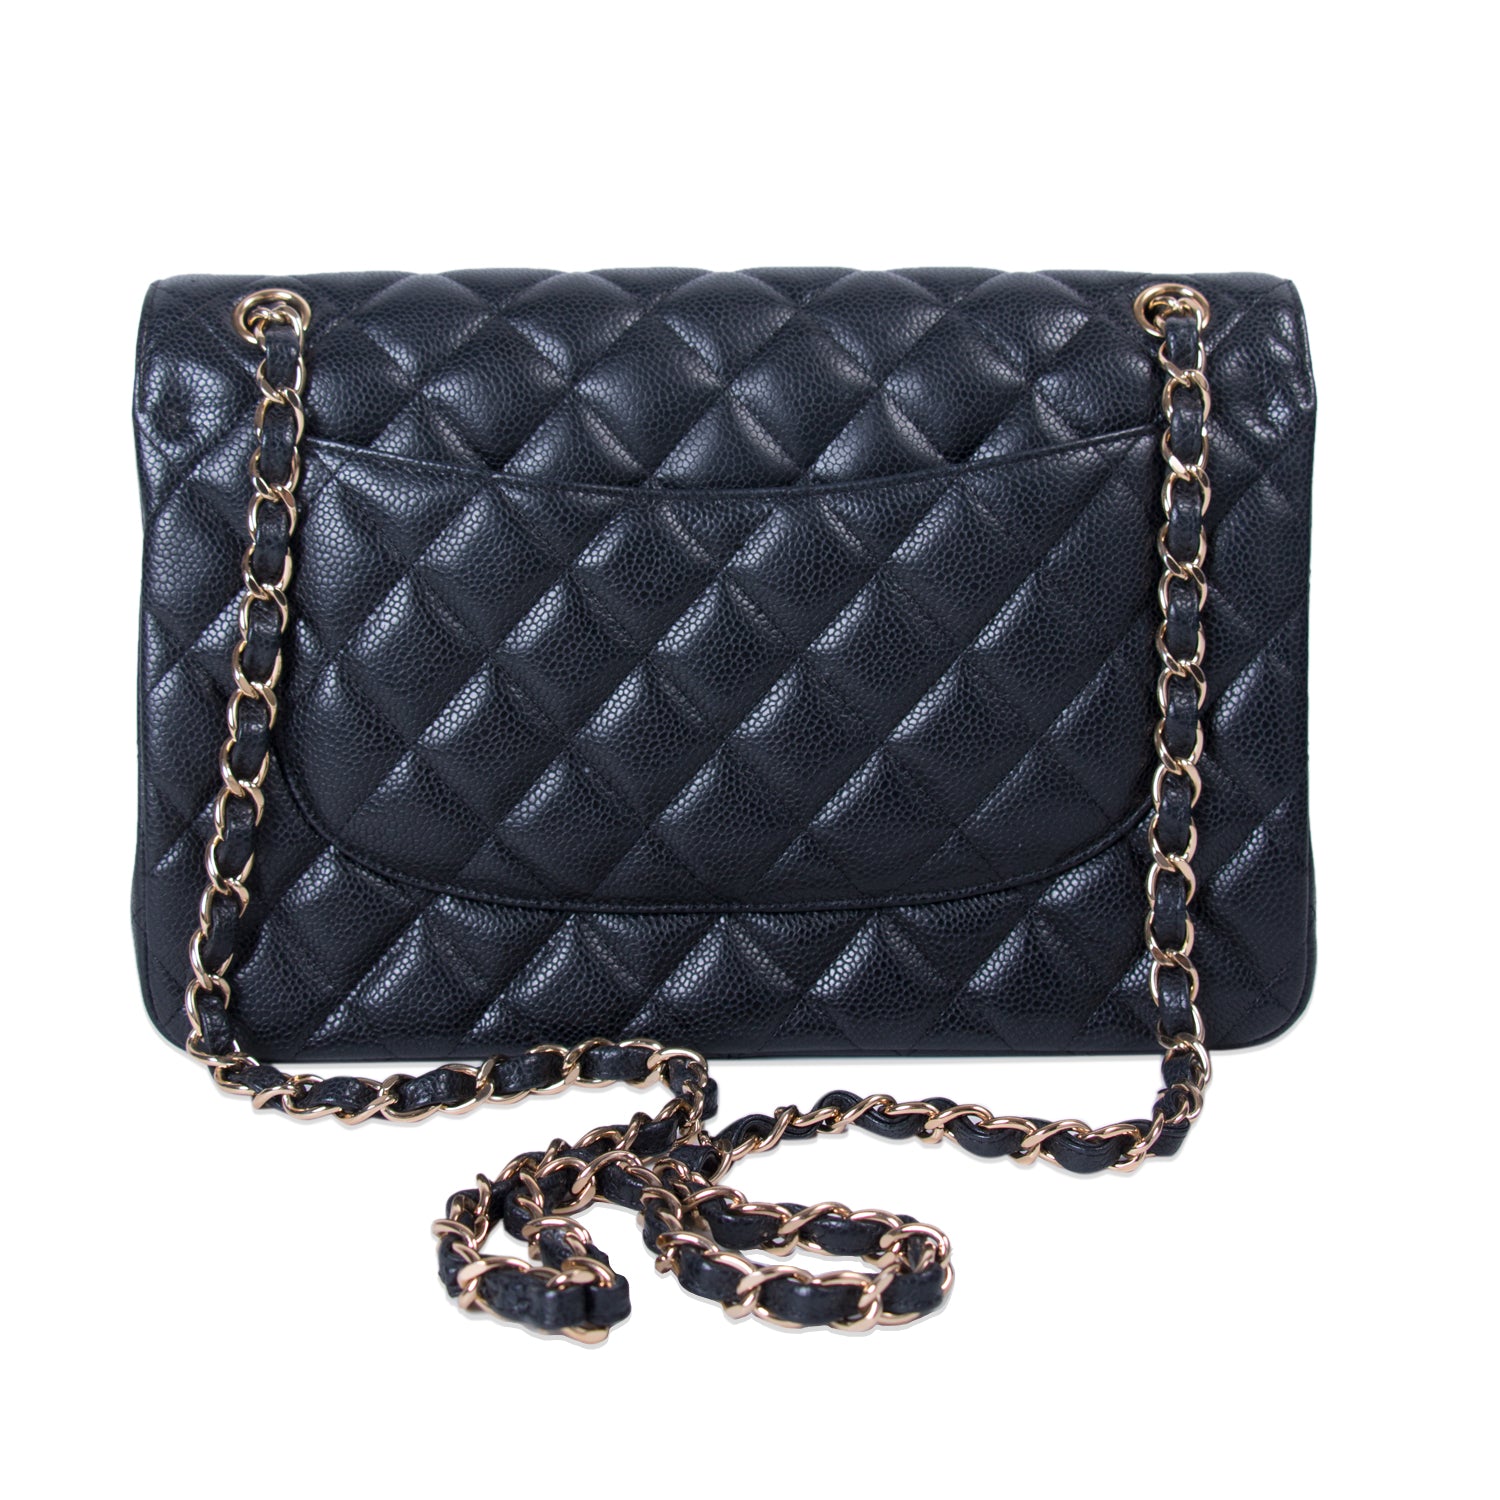 Shop authentic Chanel Classic Jumbo Double Flap Bag at revogue for just ...